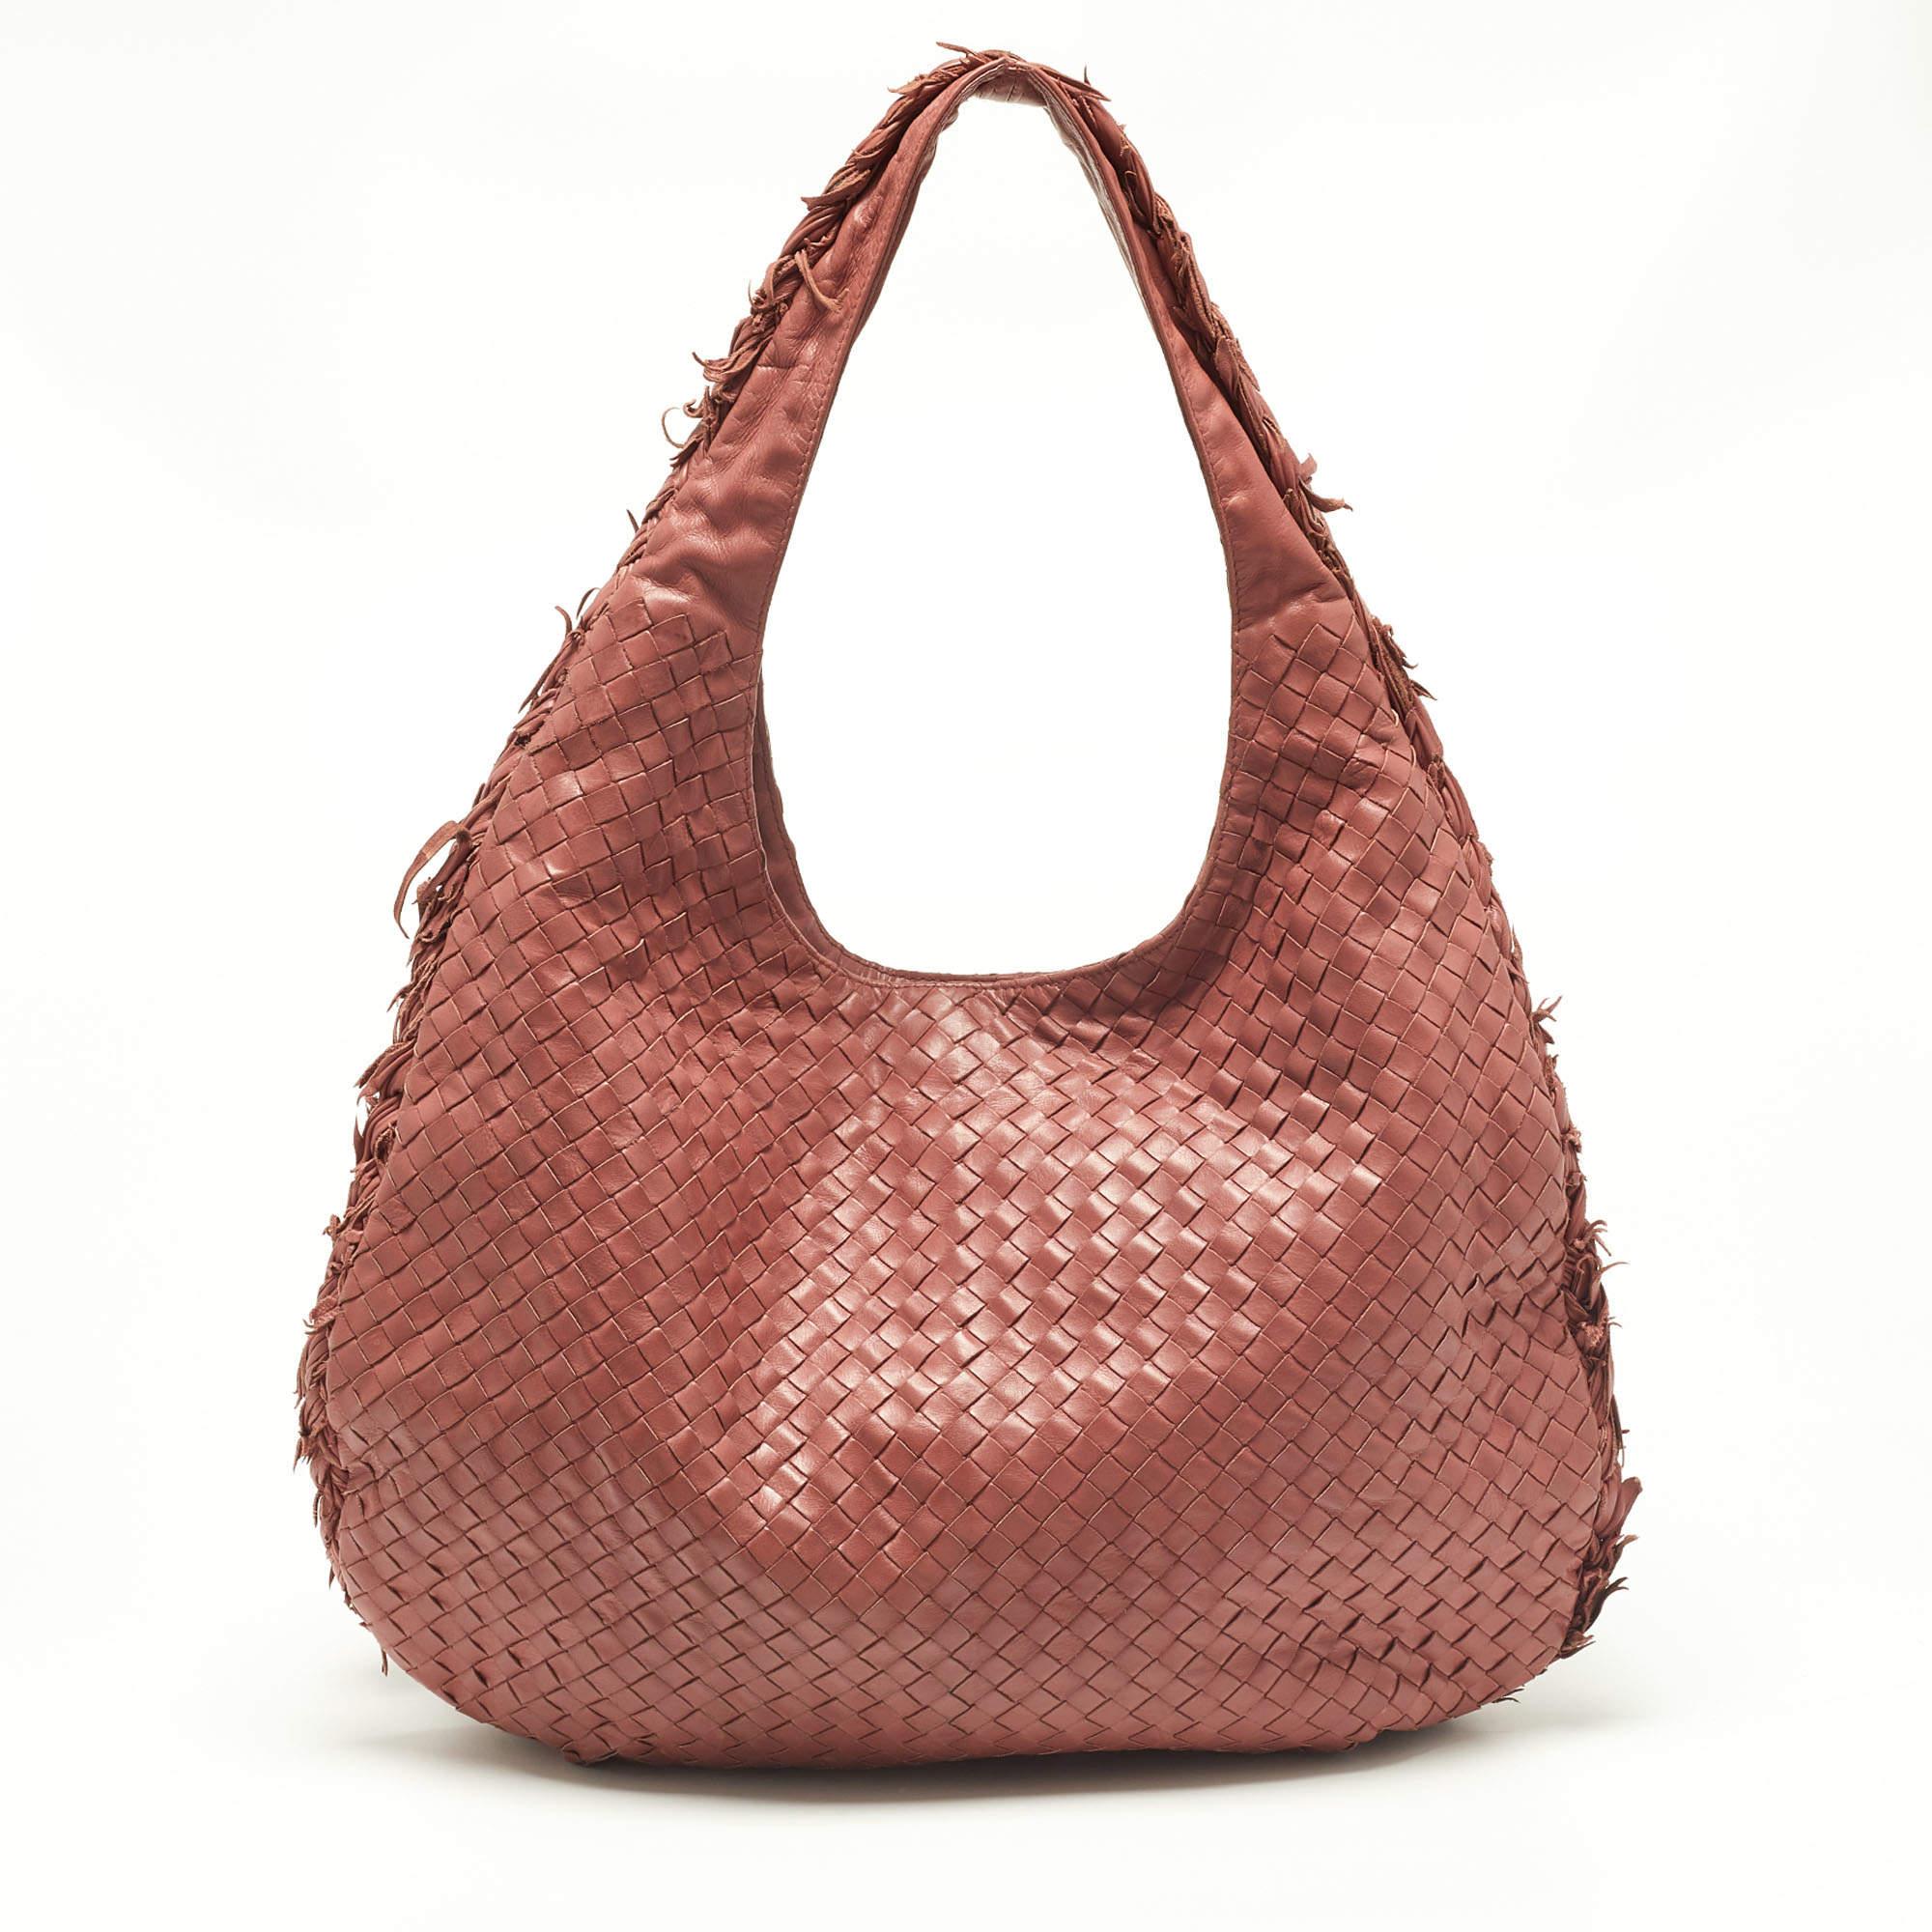 The excellent craftsmanship of this Bottega Veneta hobo ensures a brilliant finish and a rich appeal. Woven from leather in their signature Intrecciato pattern, the peach bag is provided with minimal hardware. It features a single handle and a top